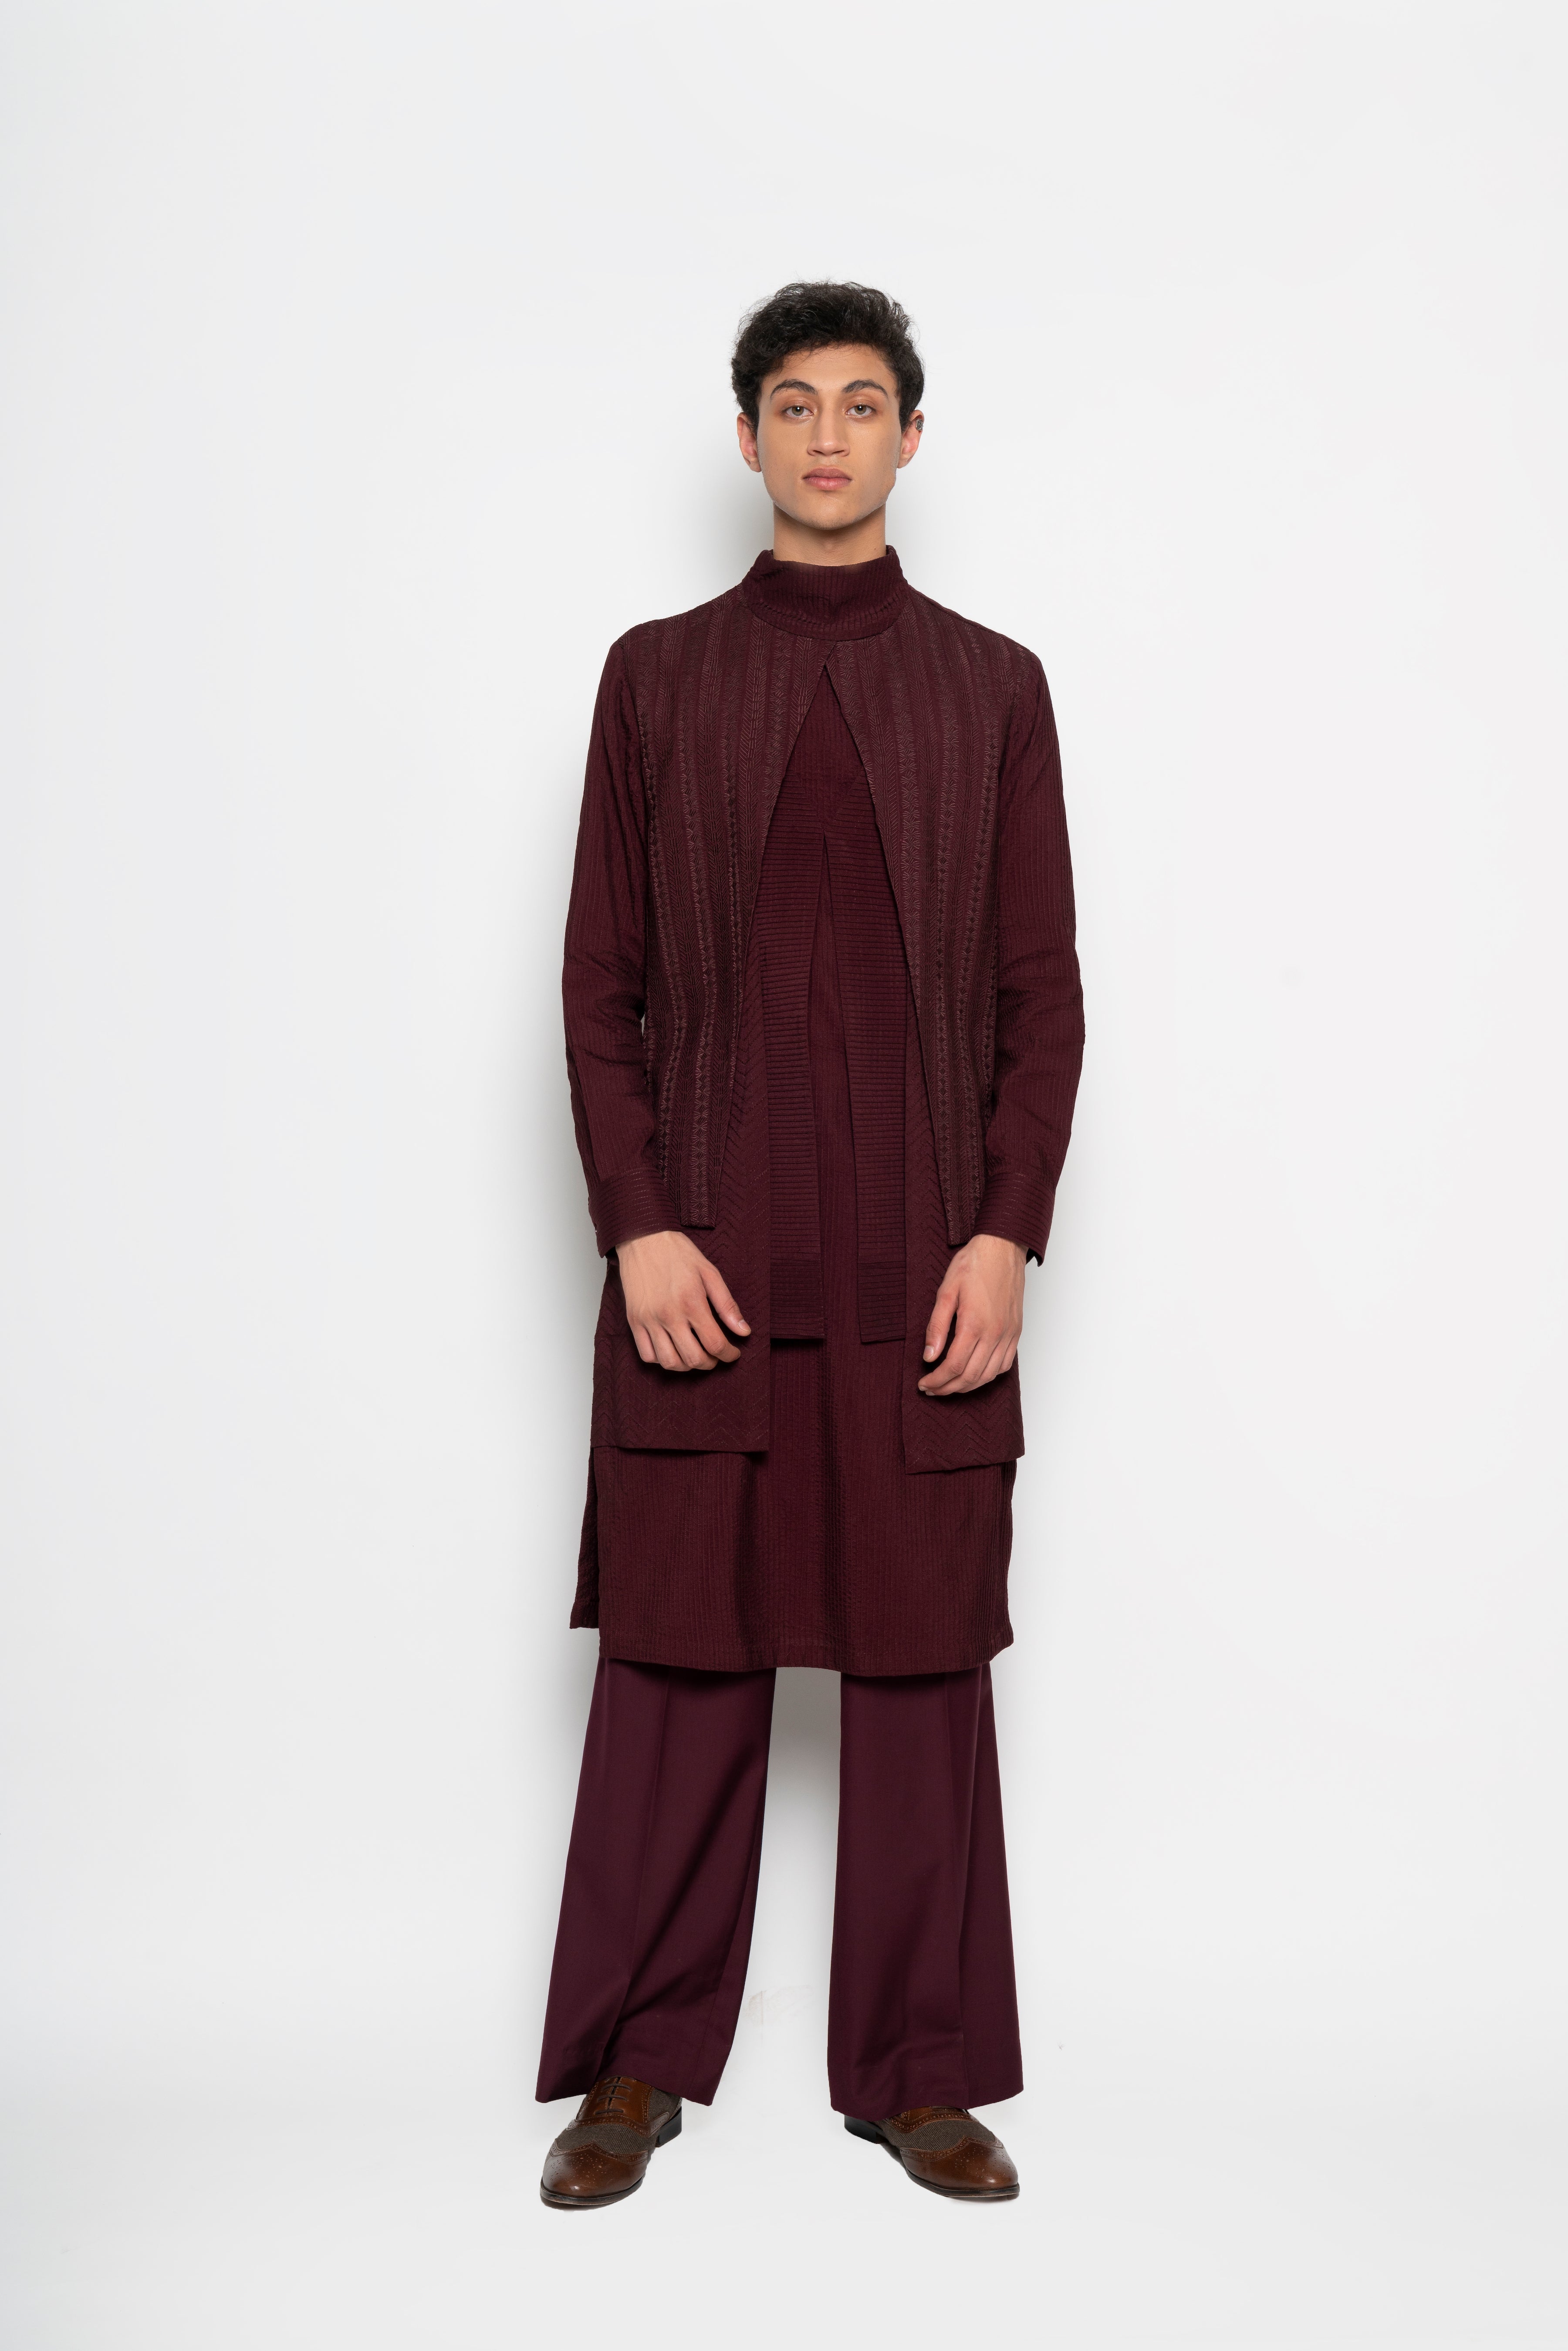 Layered Kurta in Wine with stitchwork and embroidery all over for a resplendent tonal texture. 